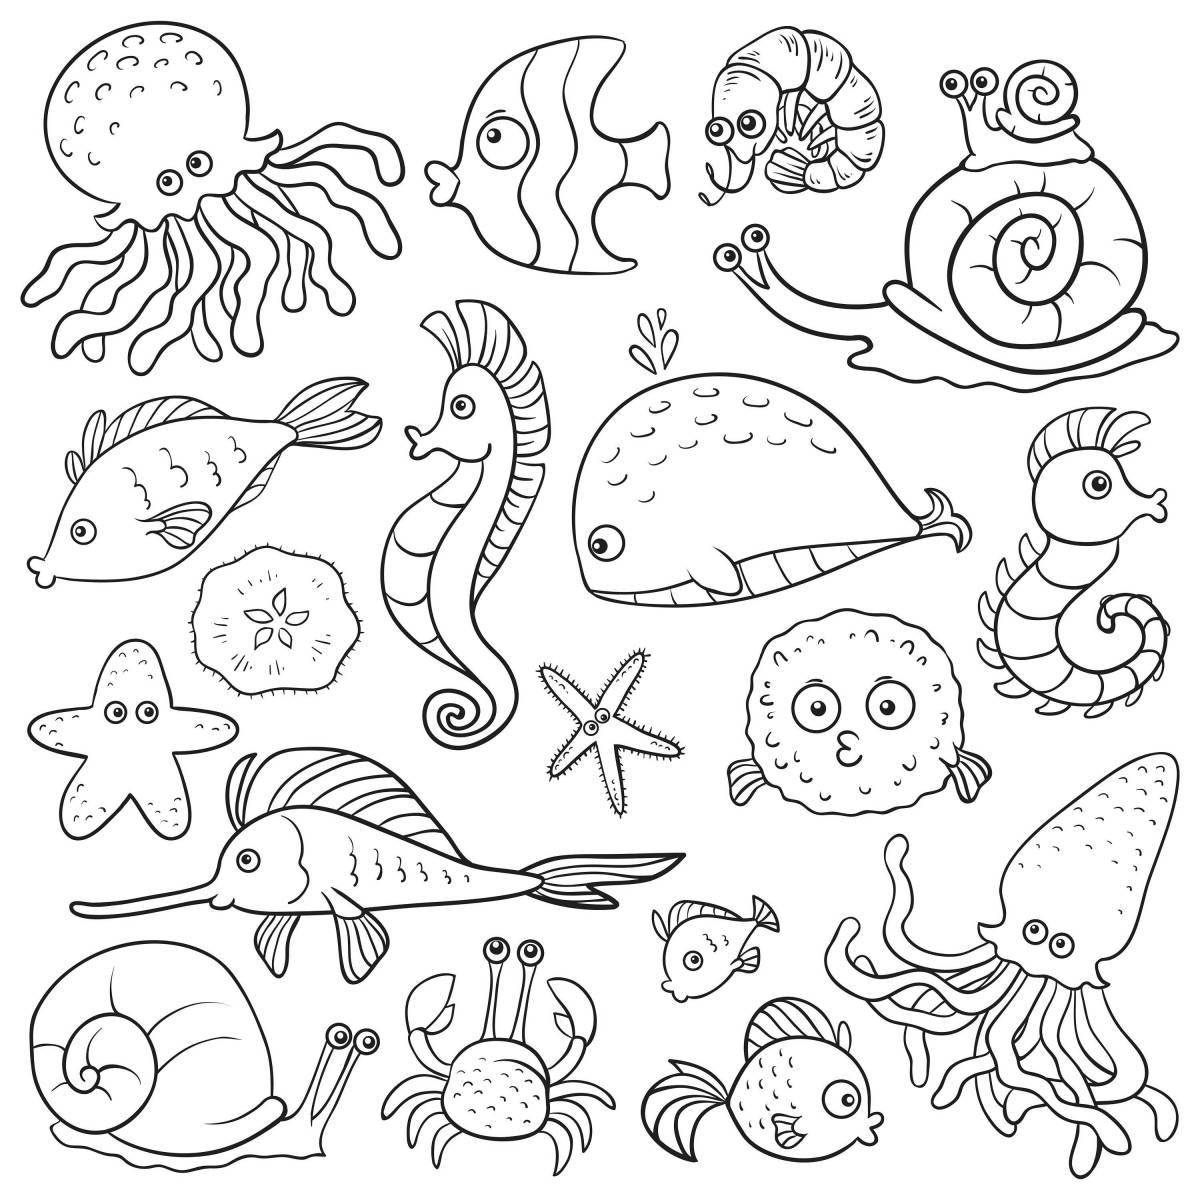 Fun coloring pages for marine life